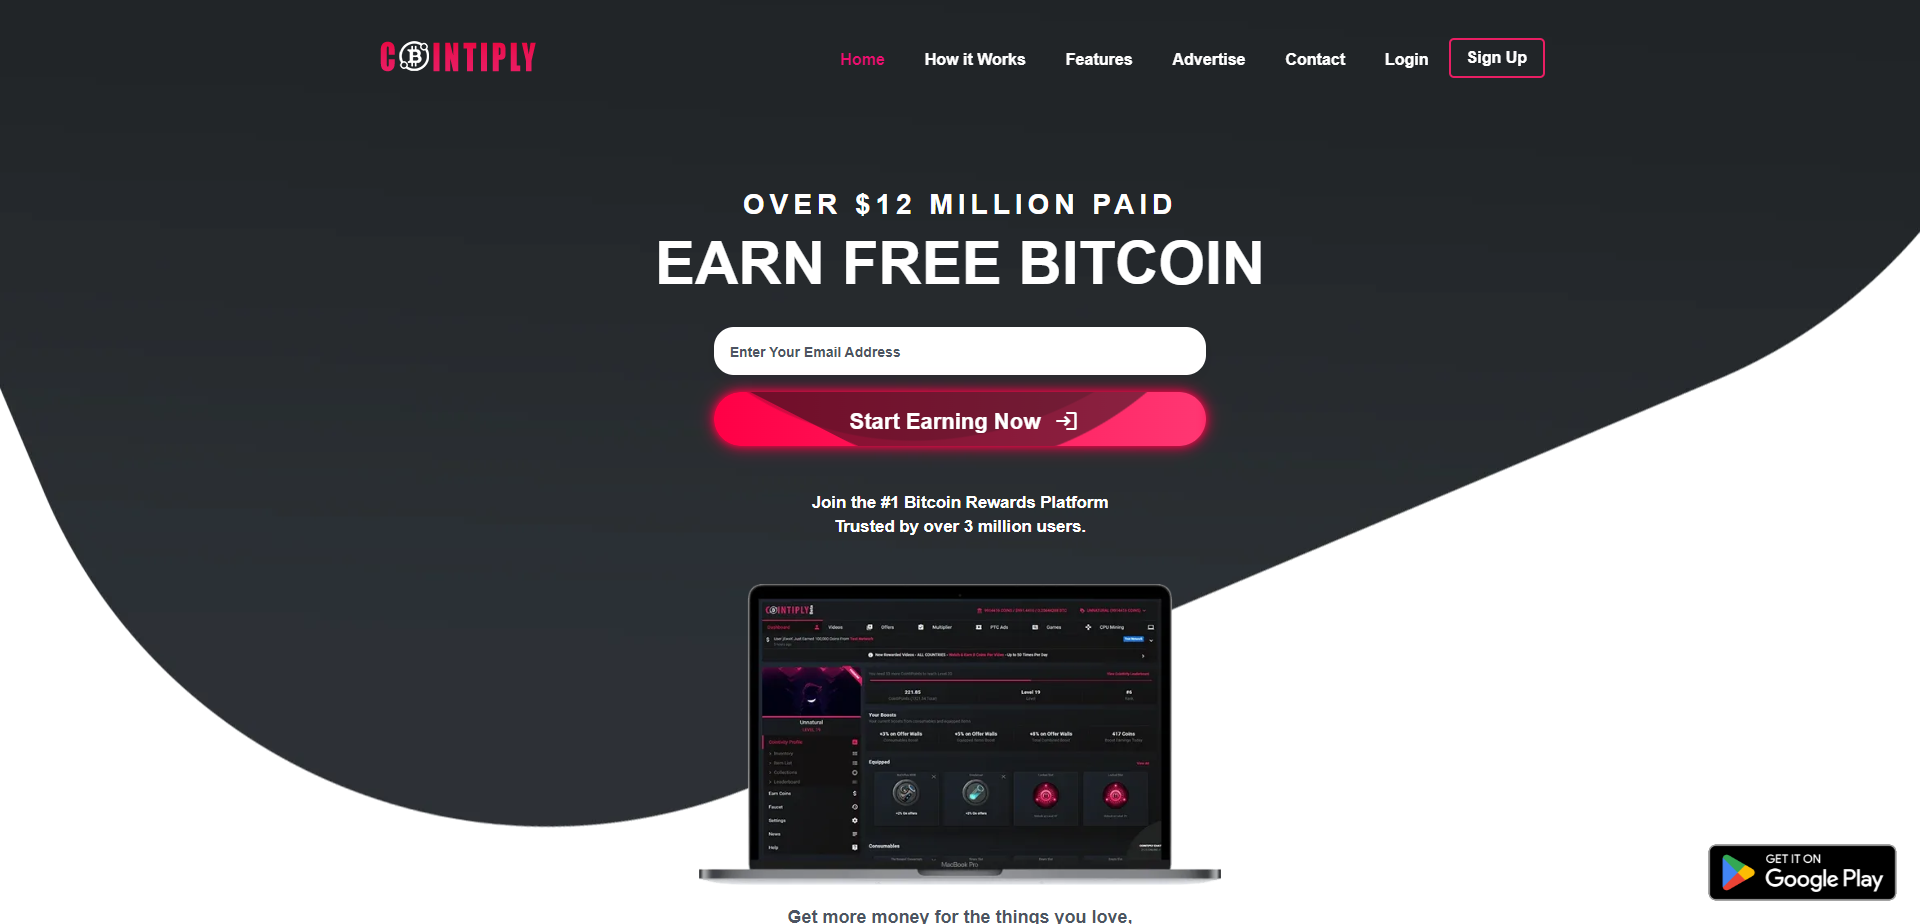 Referral Landing Page for Cointiply